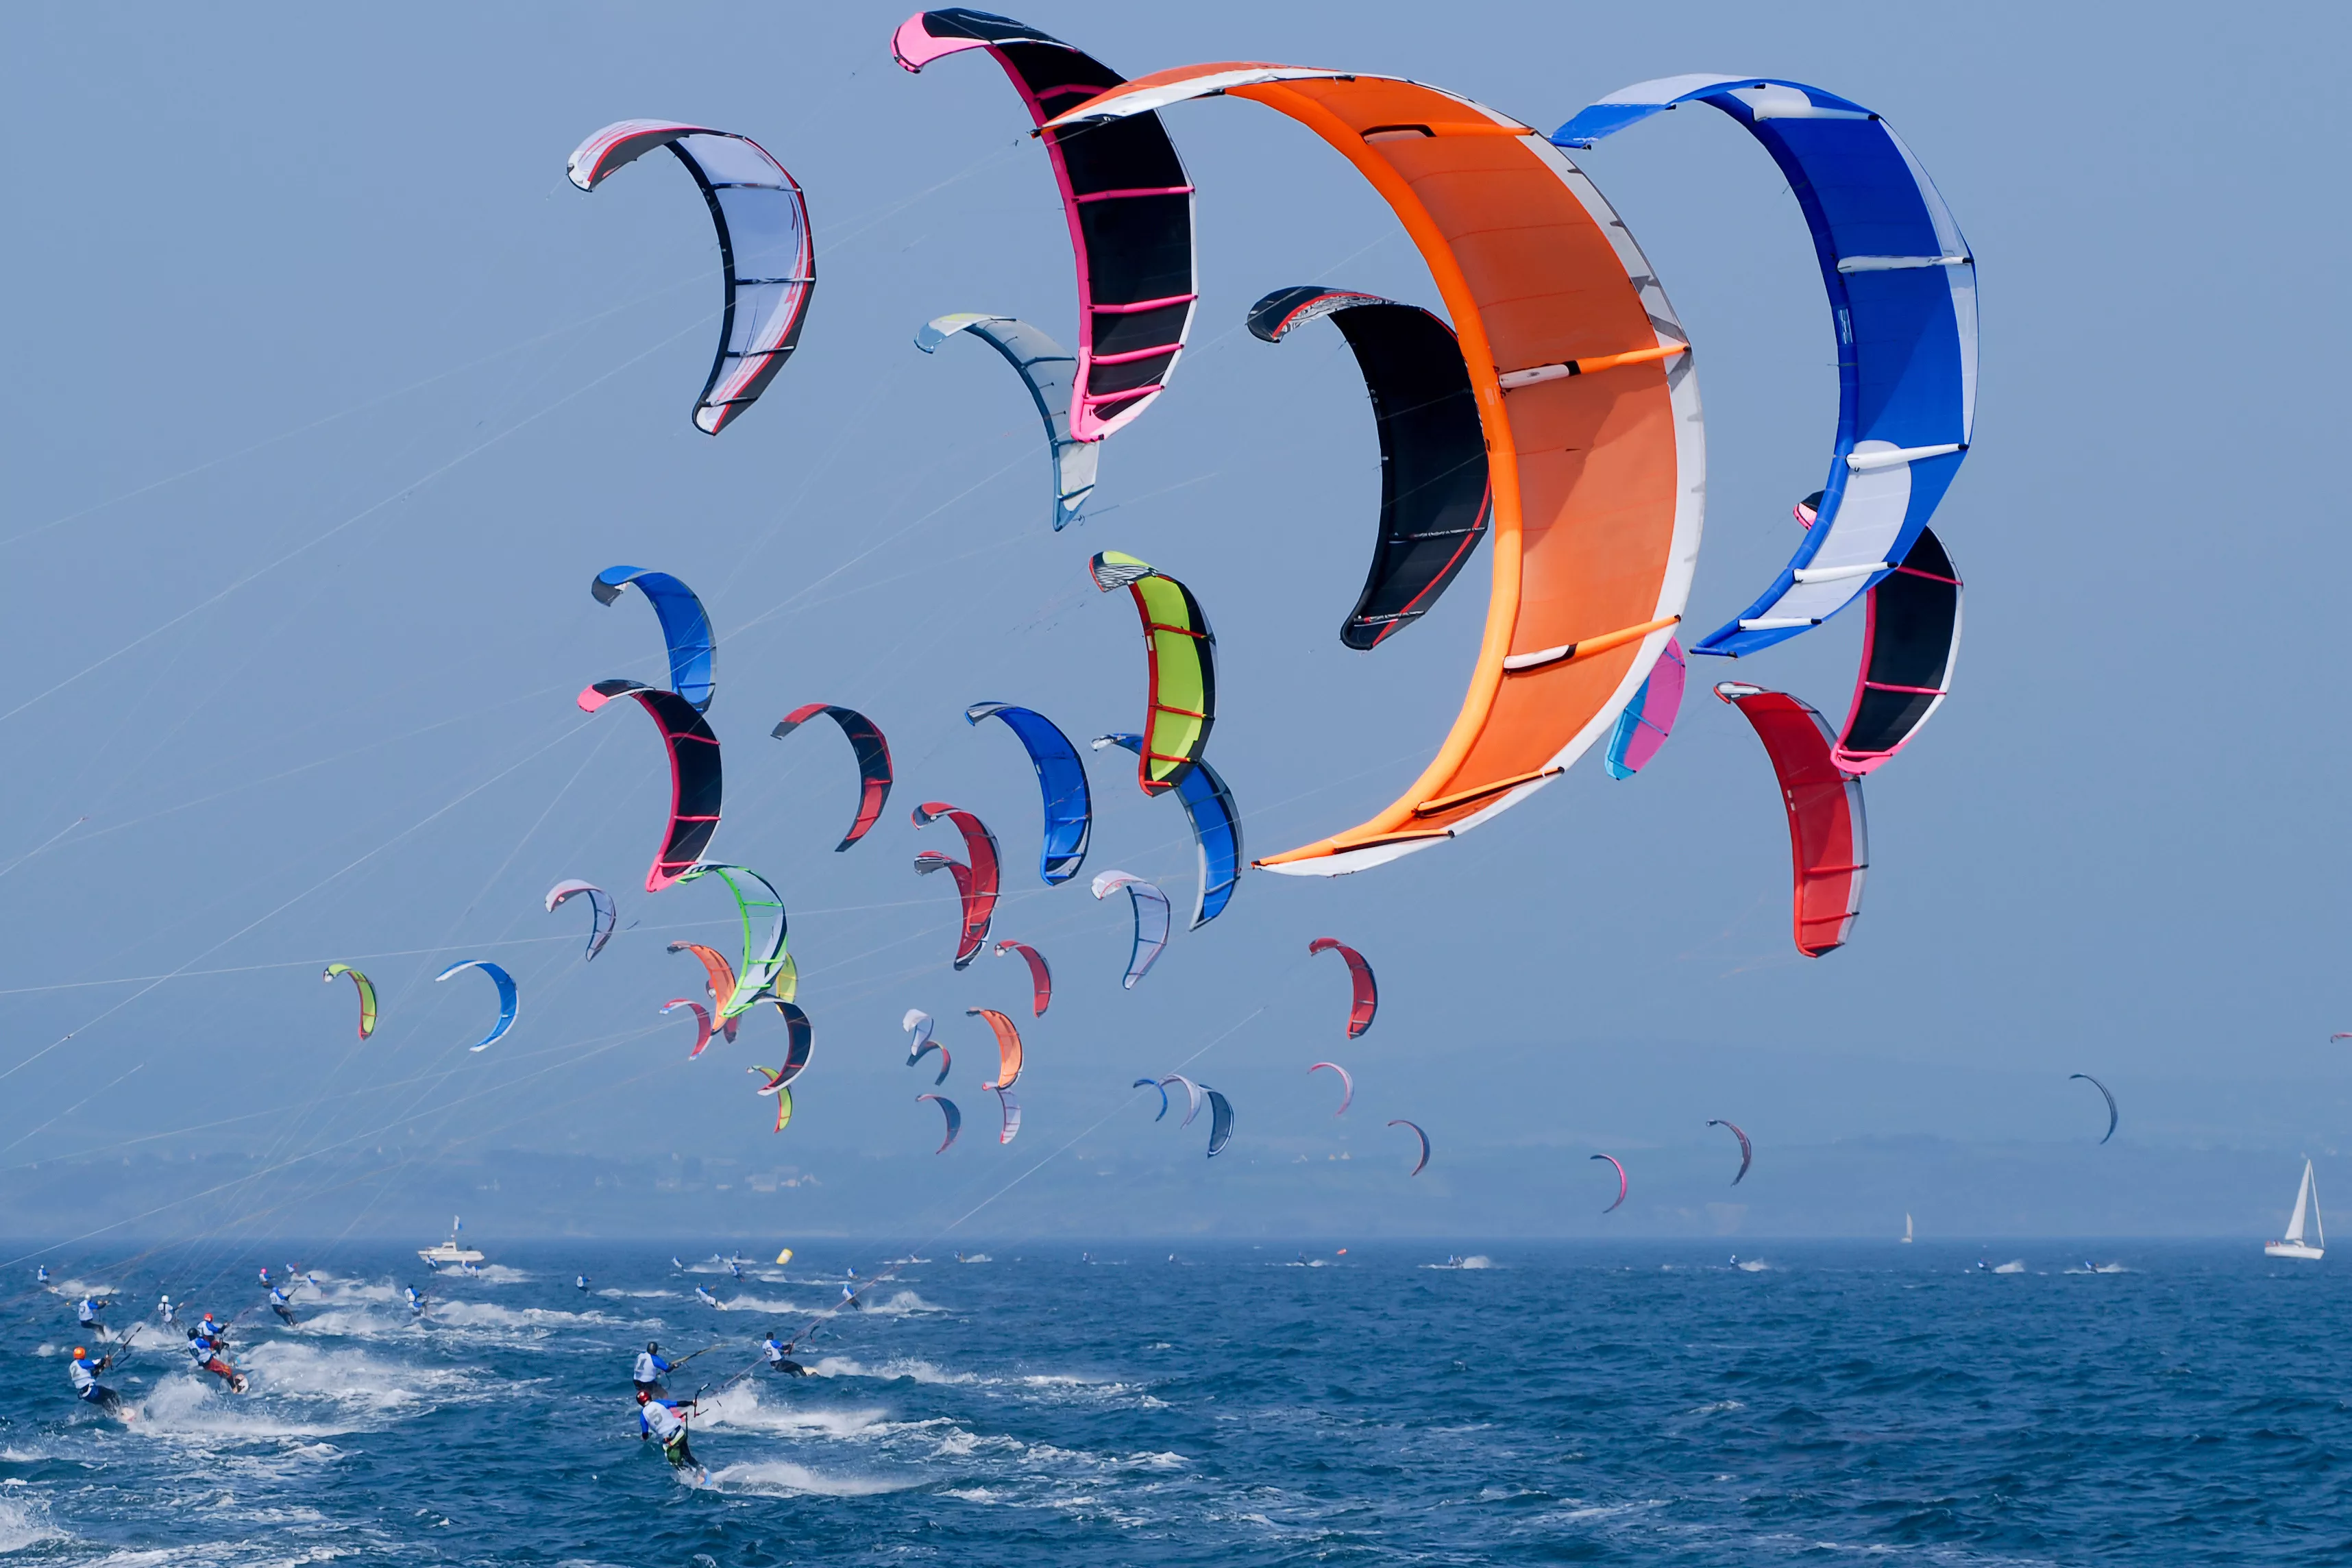 Blue Adventures in New Zealand, Australia and Oceania | Kitesurfing,Windsurfing - Rated 1.1